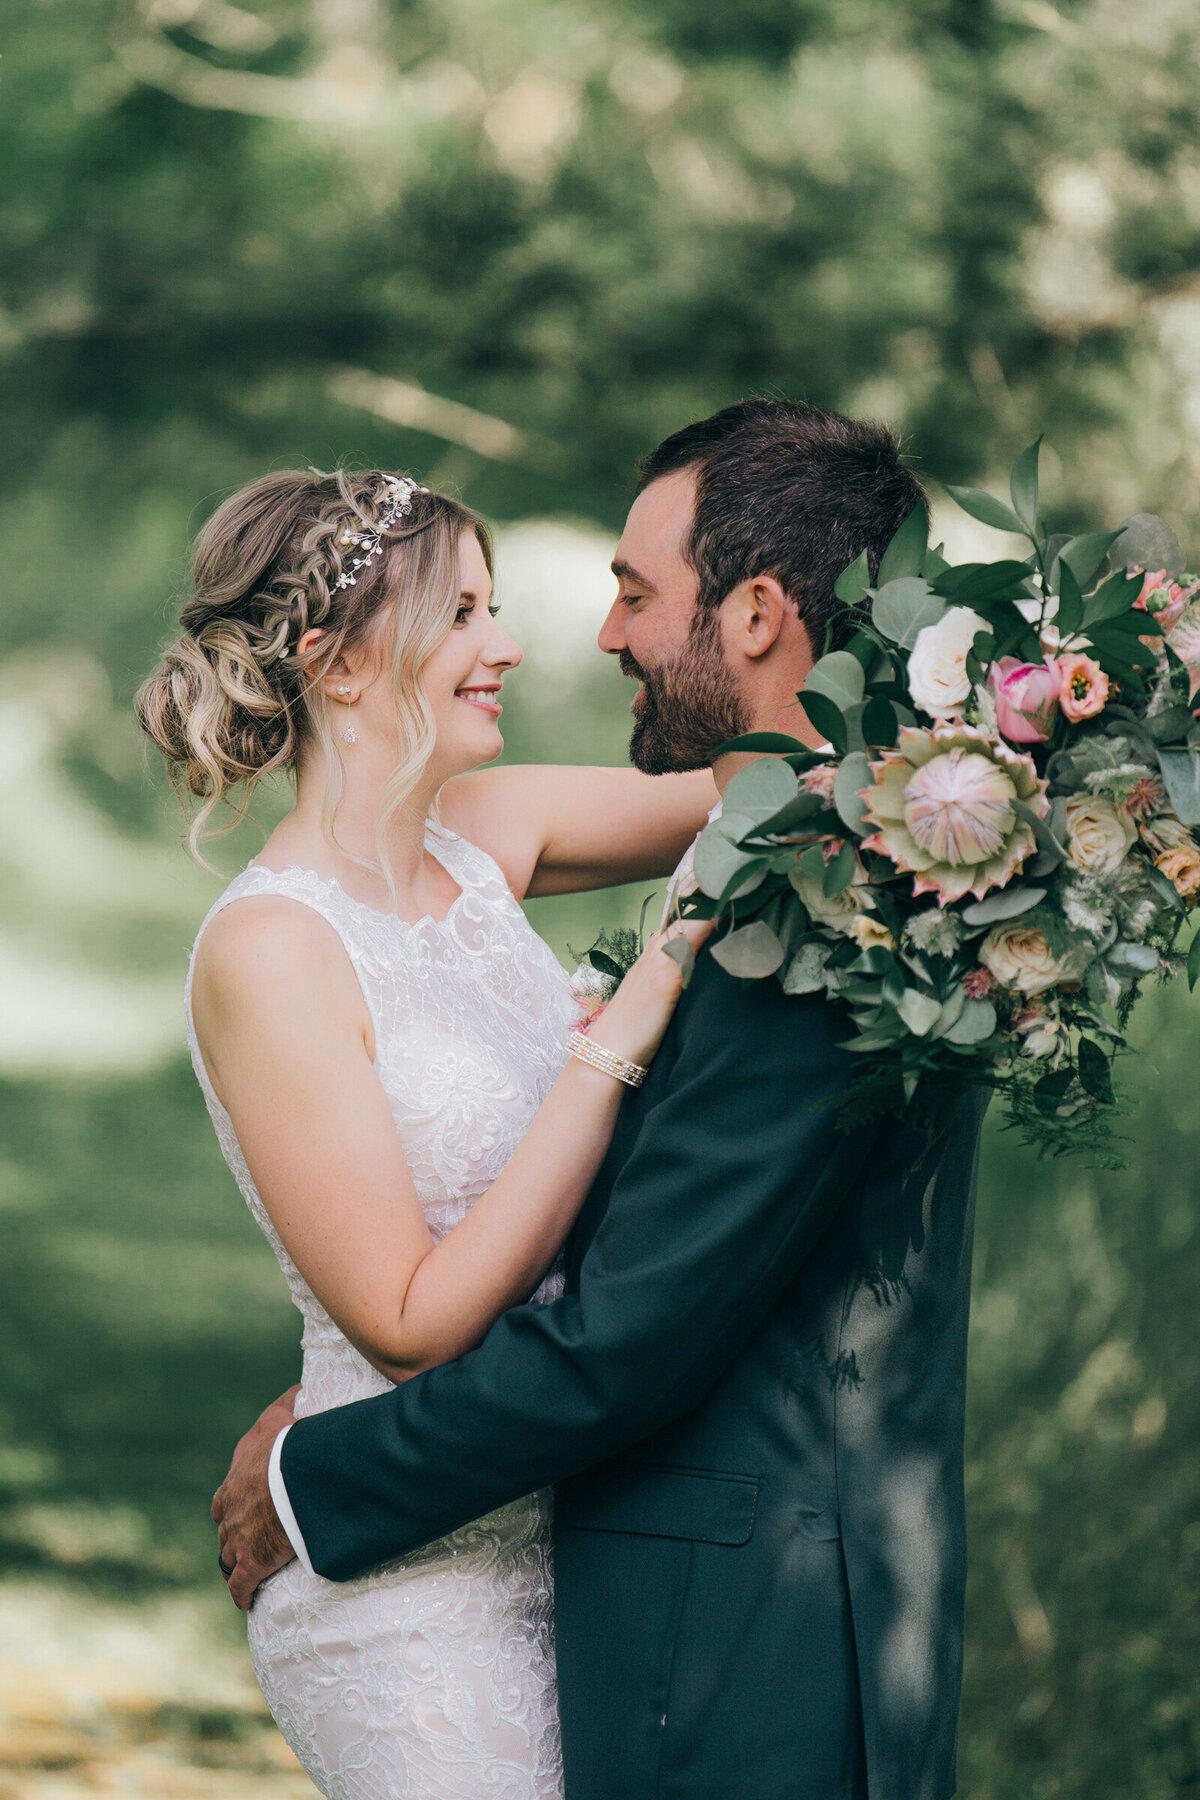 A bride wearing an elegant lace wedding dress smiling at her groom wearing a green wedding suit